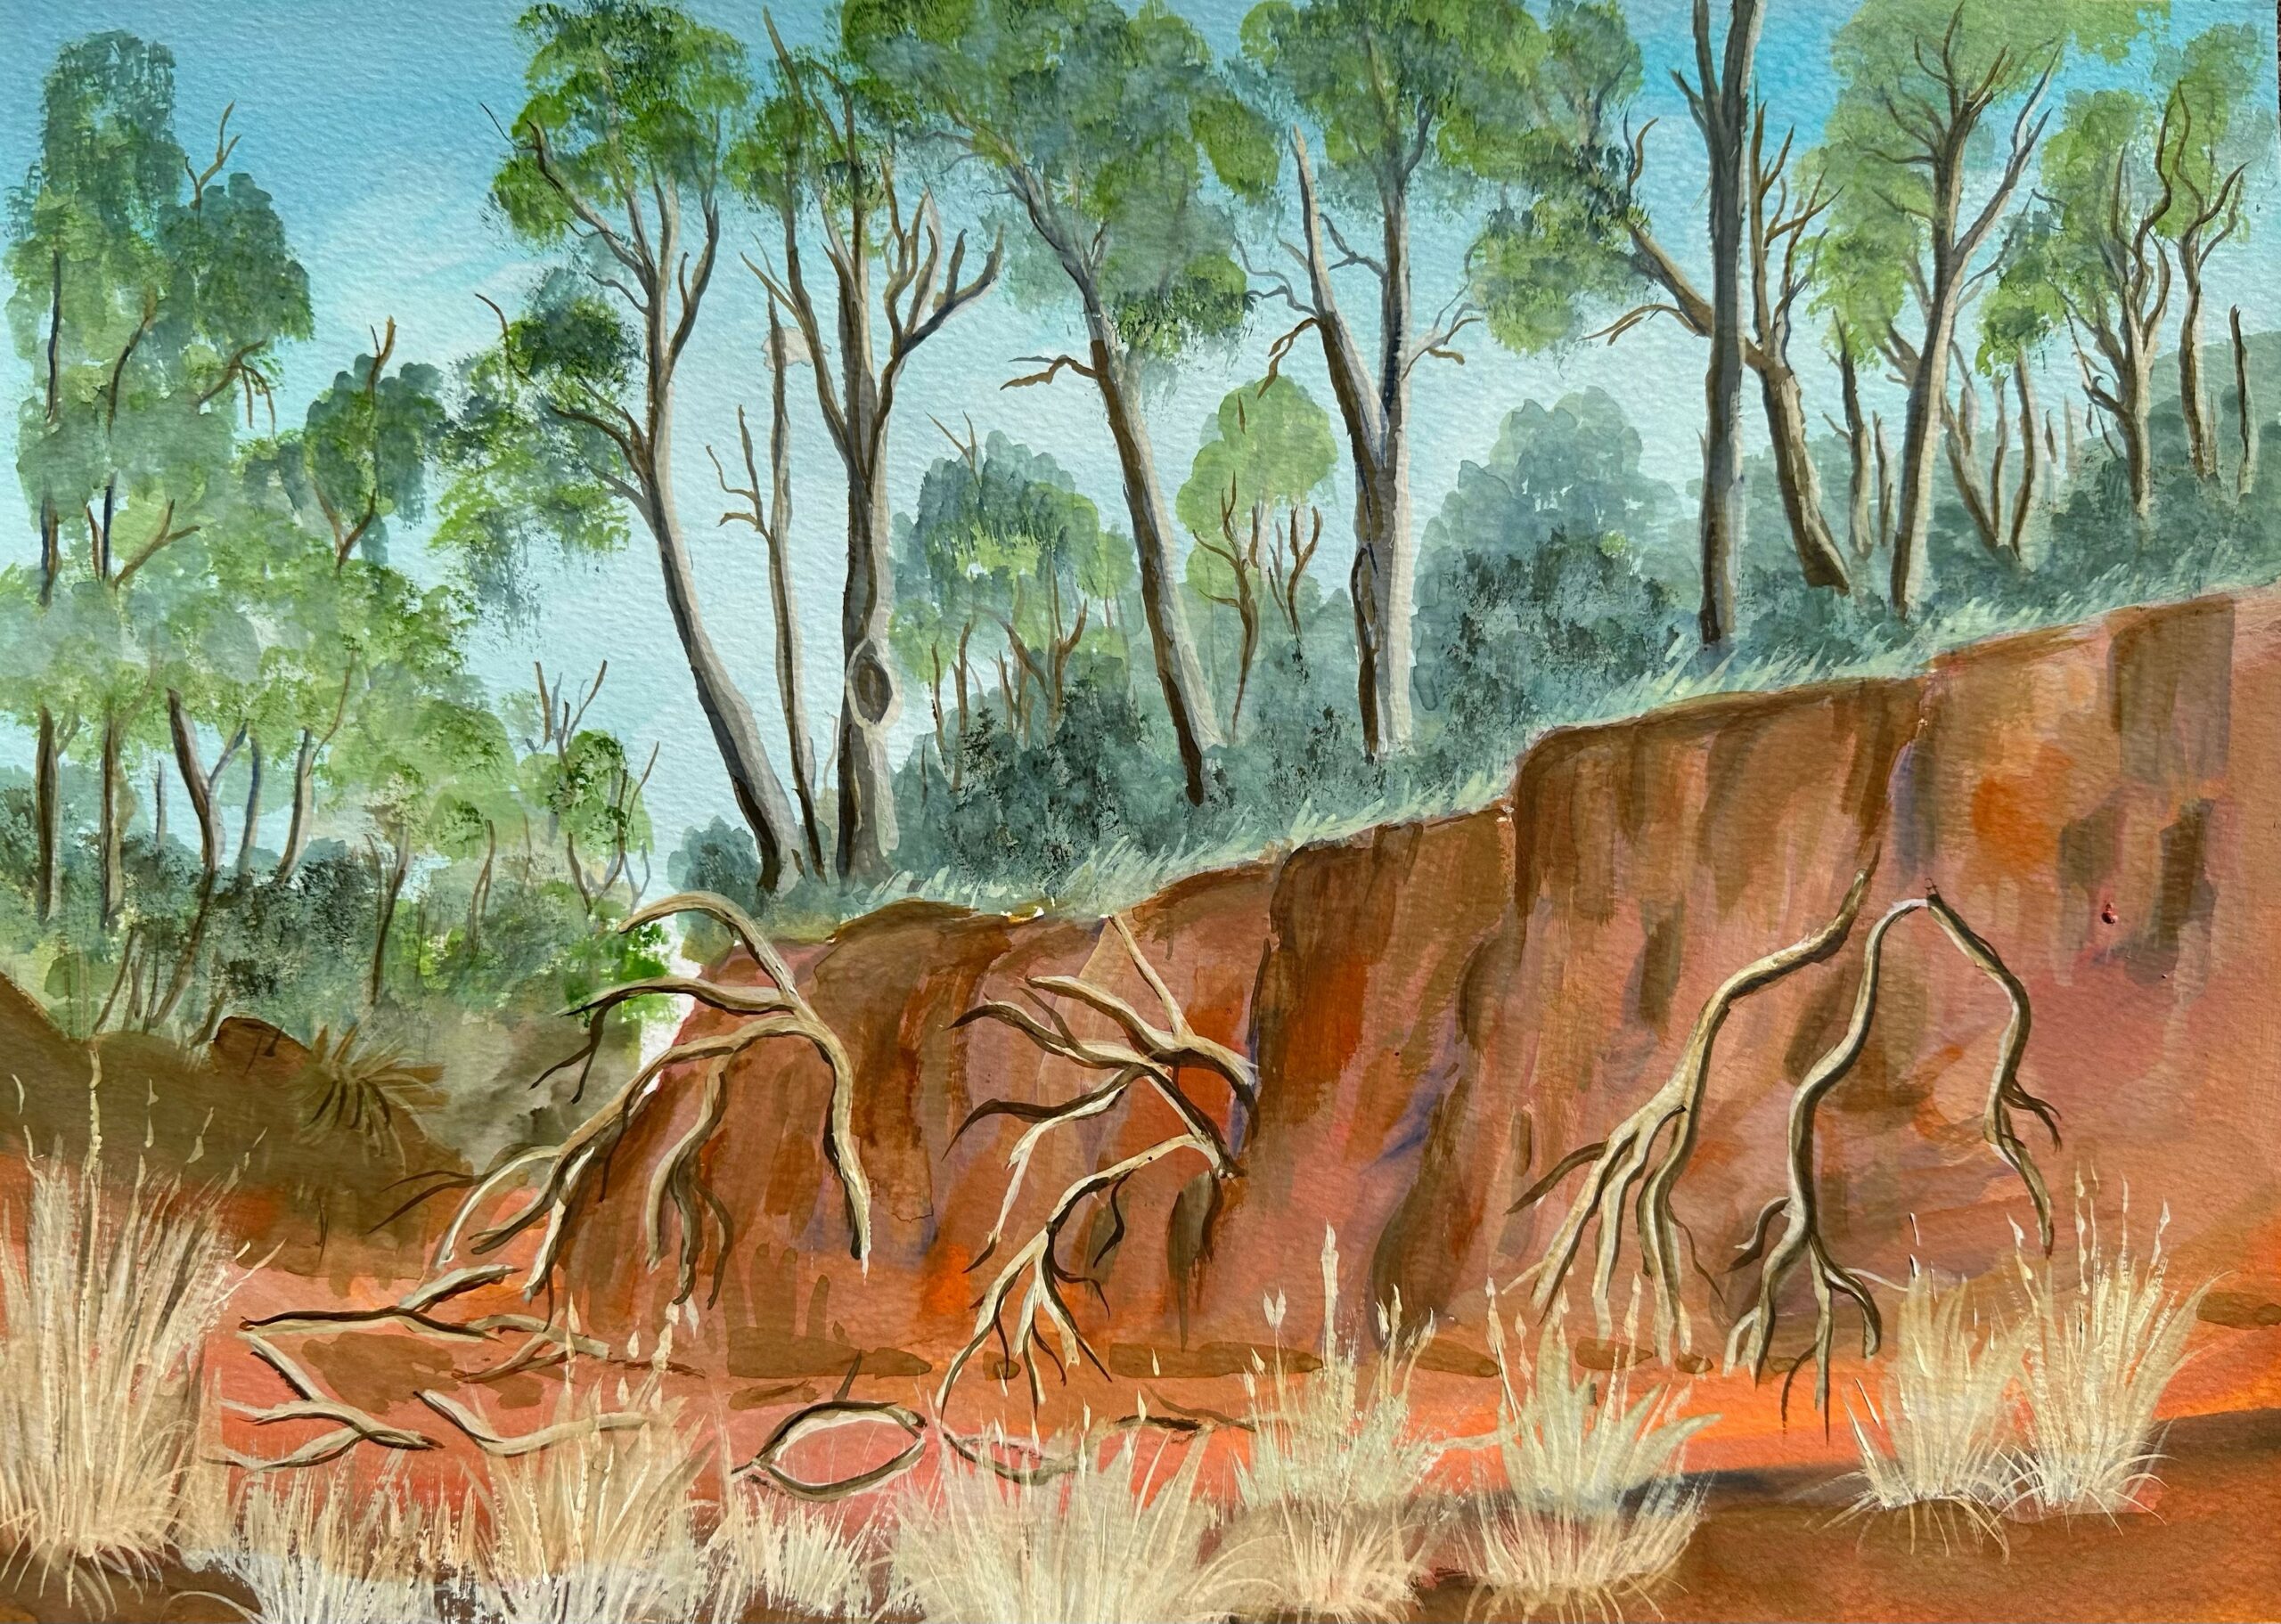 The Werribee Gorge, rich reds, browns and oranges create the gorge below, scattered bunches of yellow straw grass, dead tree branches hanging from the earth walls. Above are tall euculyptus trees, vibrant and green leaves contrasting the soft, blue sky.